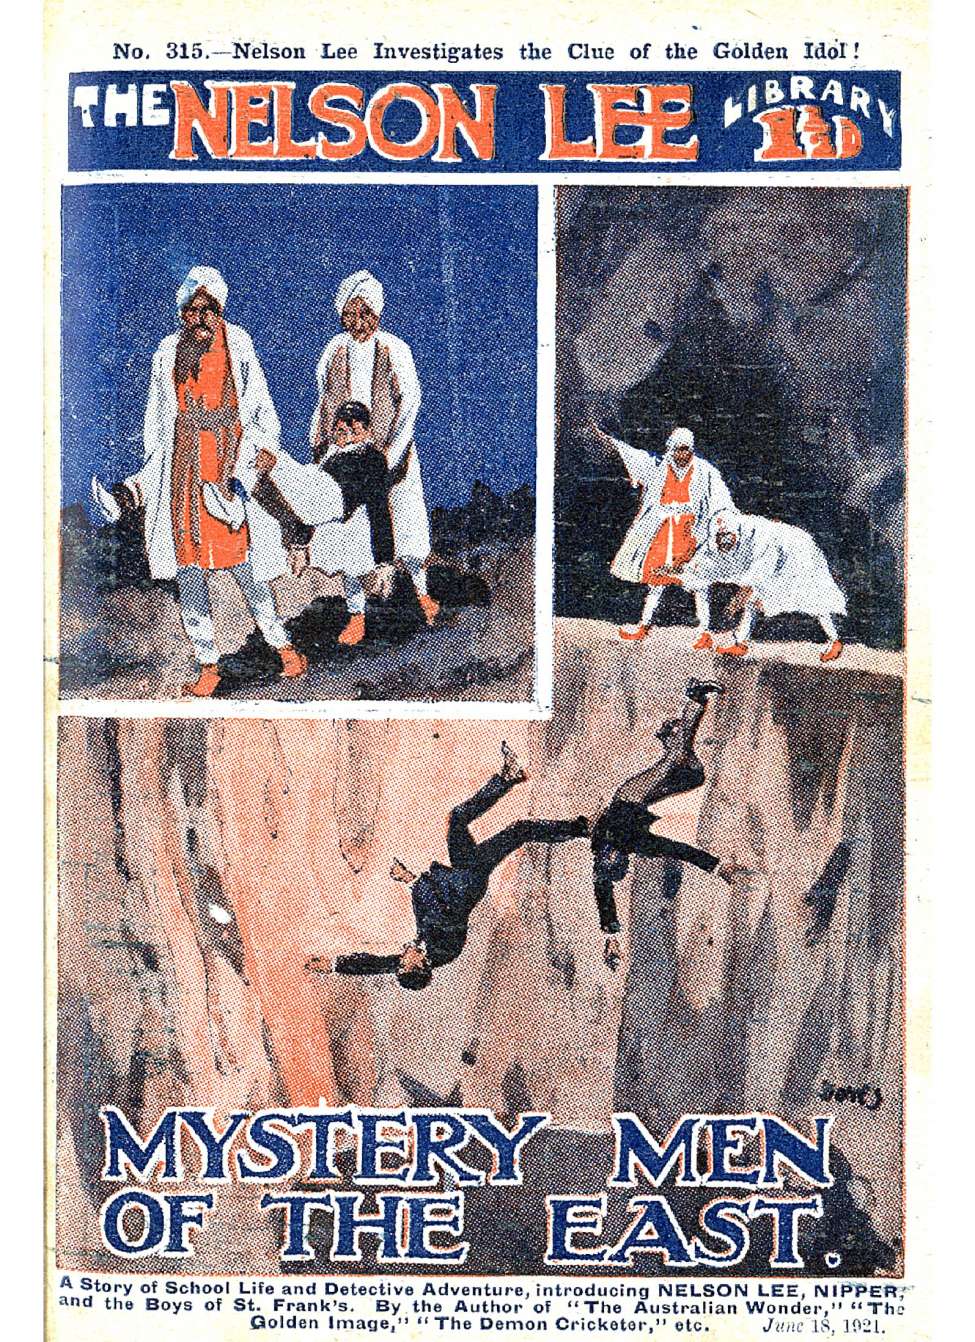 Comic Book Cover For Nelson Lee Library s1 315 - Mystery Men of the East